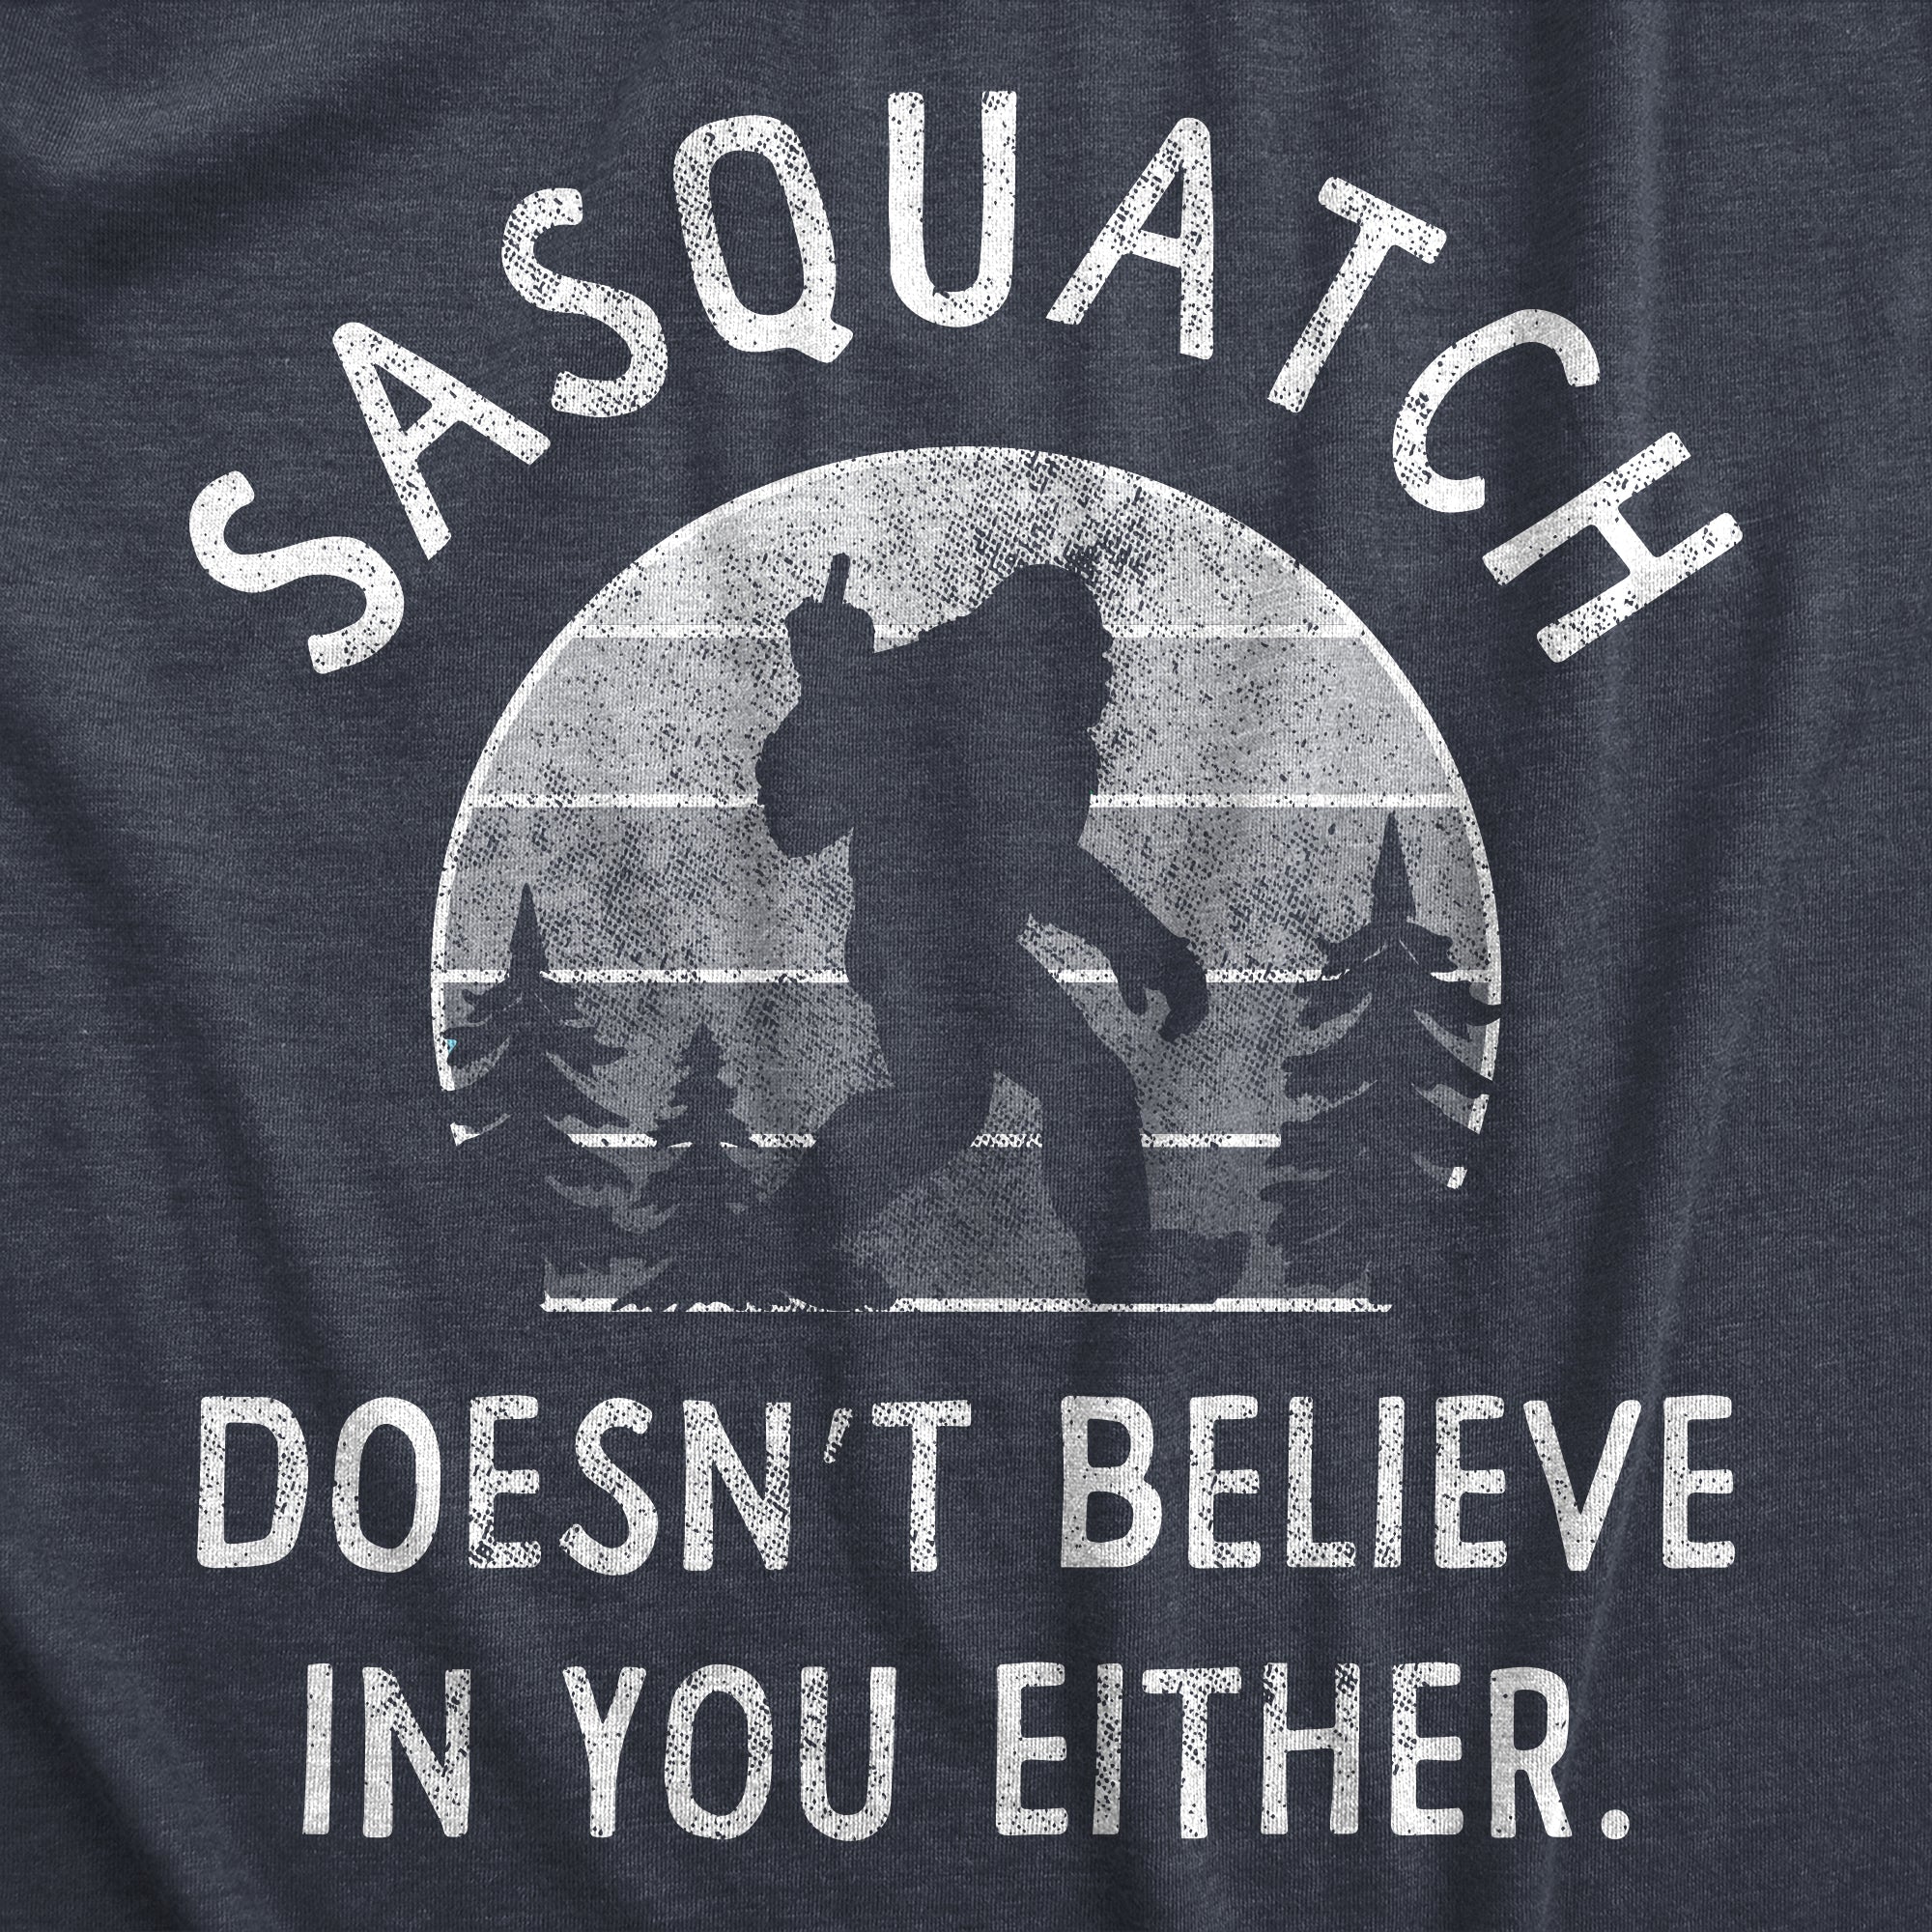 Funny Heather Navy Sasquatch Doesnt Believe In You Either Mens T Shirt Nerdy Sarcastic animal Tee